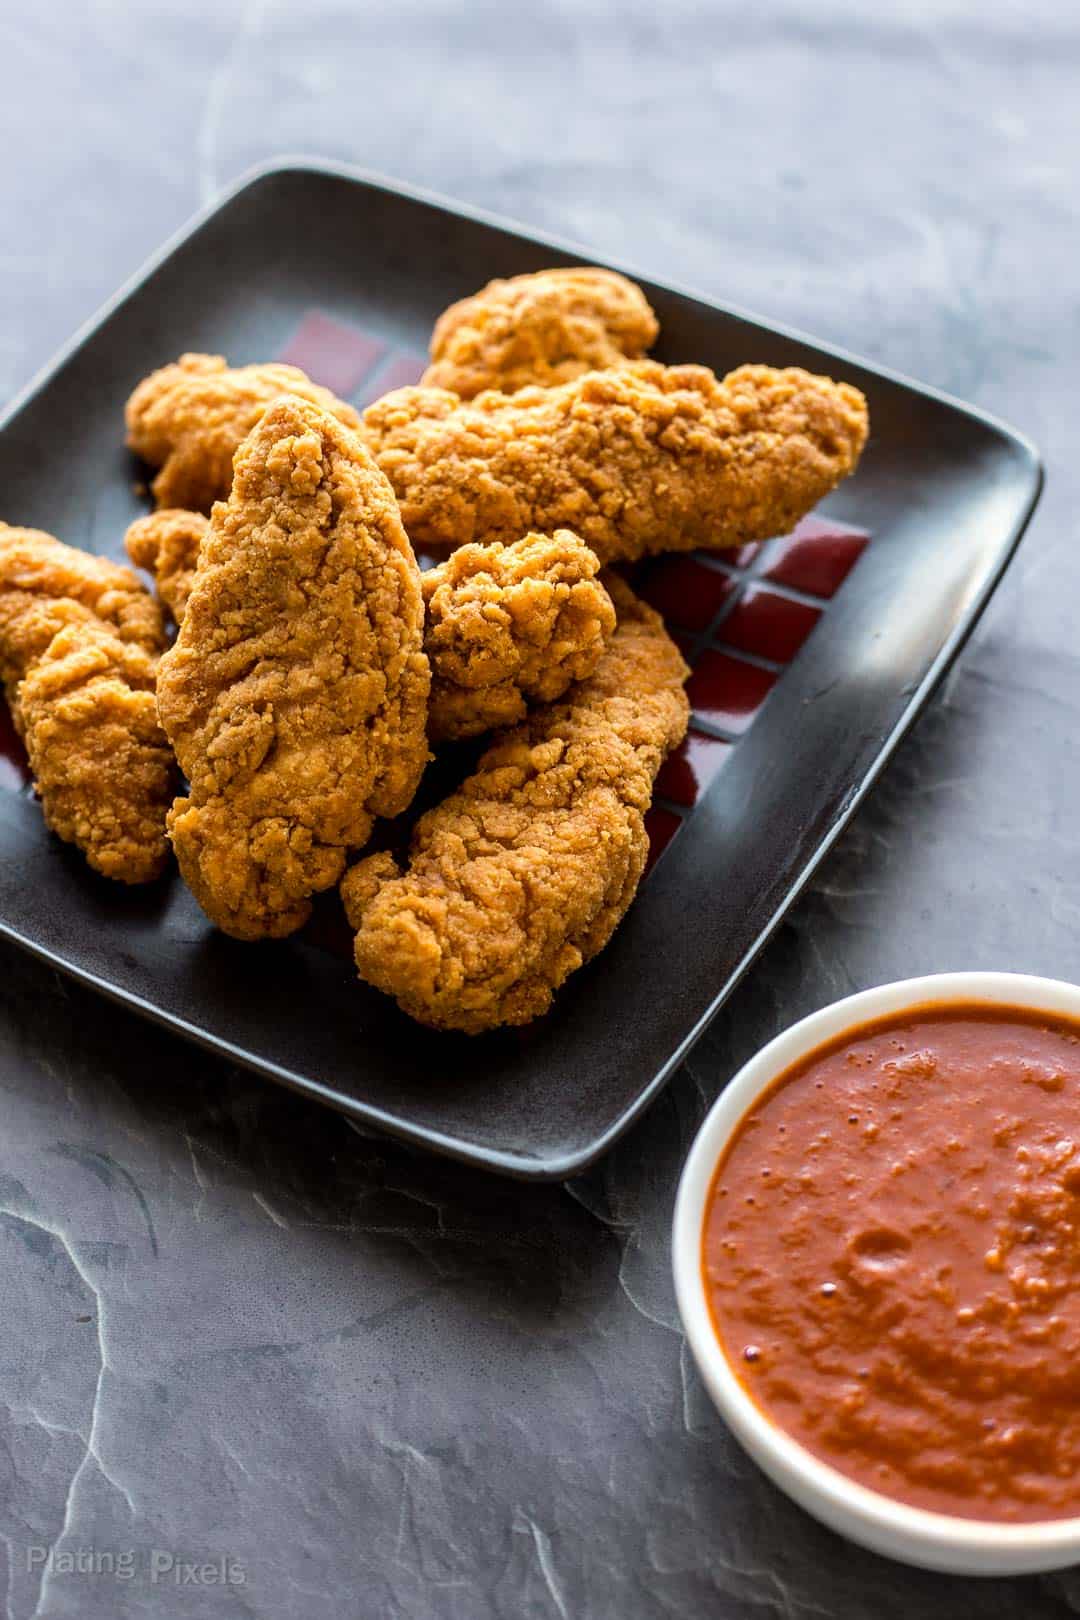 A plate of chicken strips next to homemade barbecue sauce for dipping